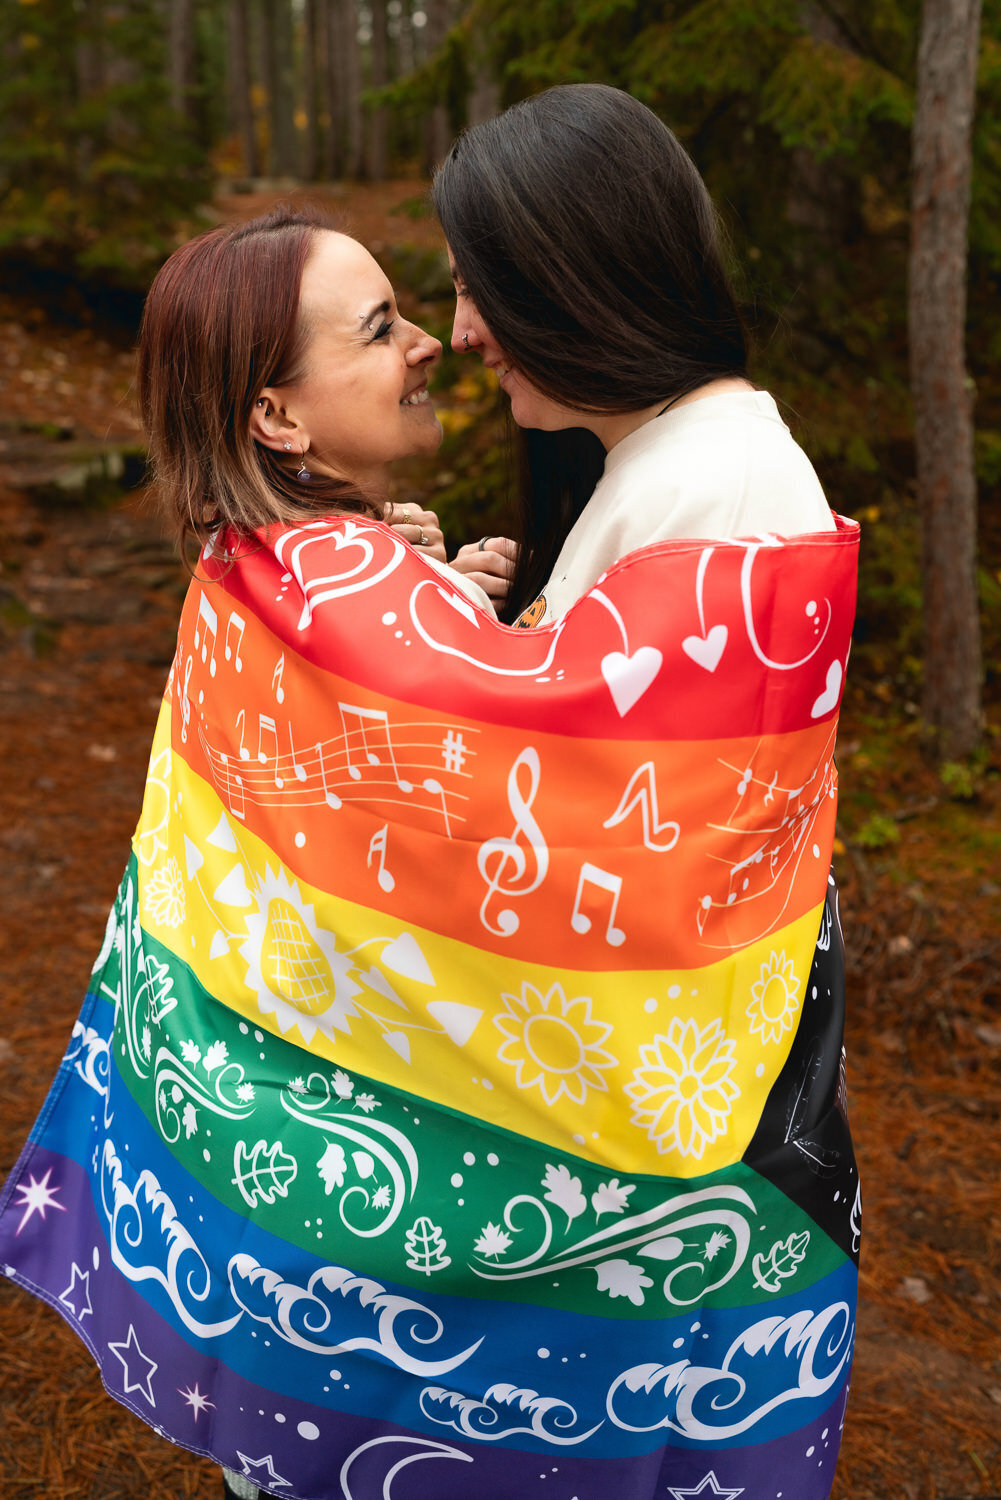 Lesbian couple smiles at each other wrapped in a rainbow flag.